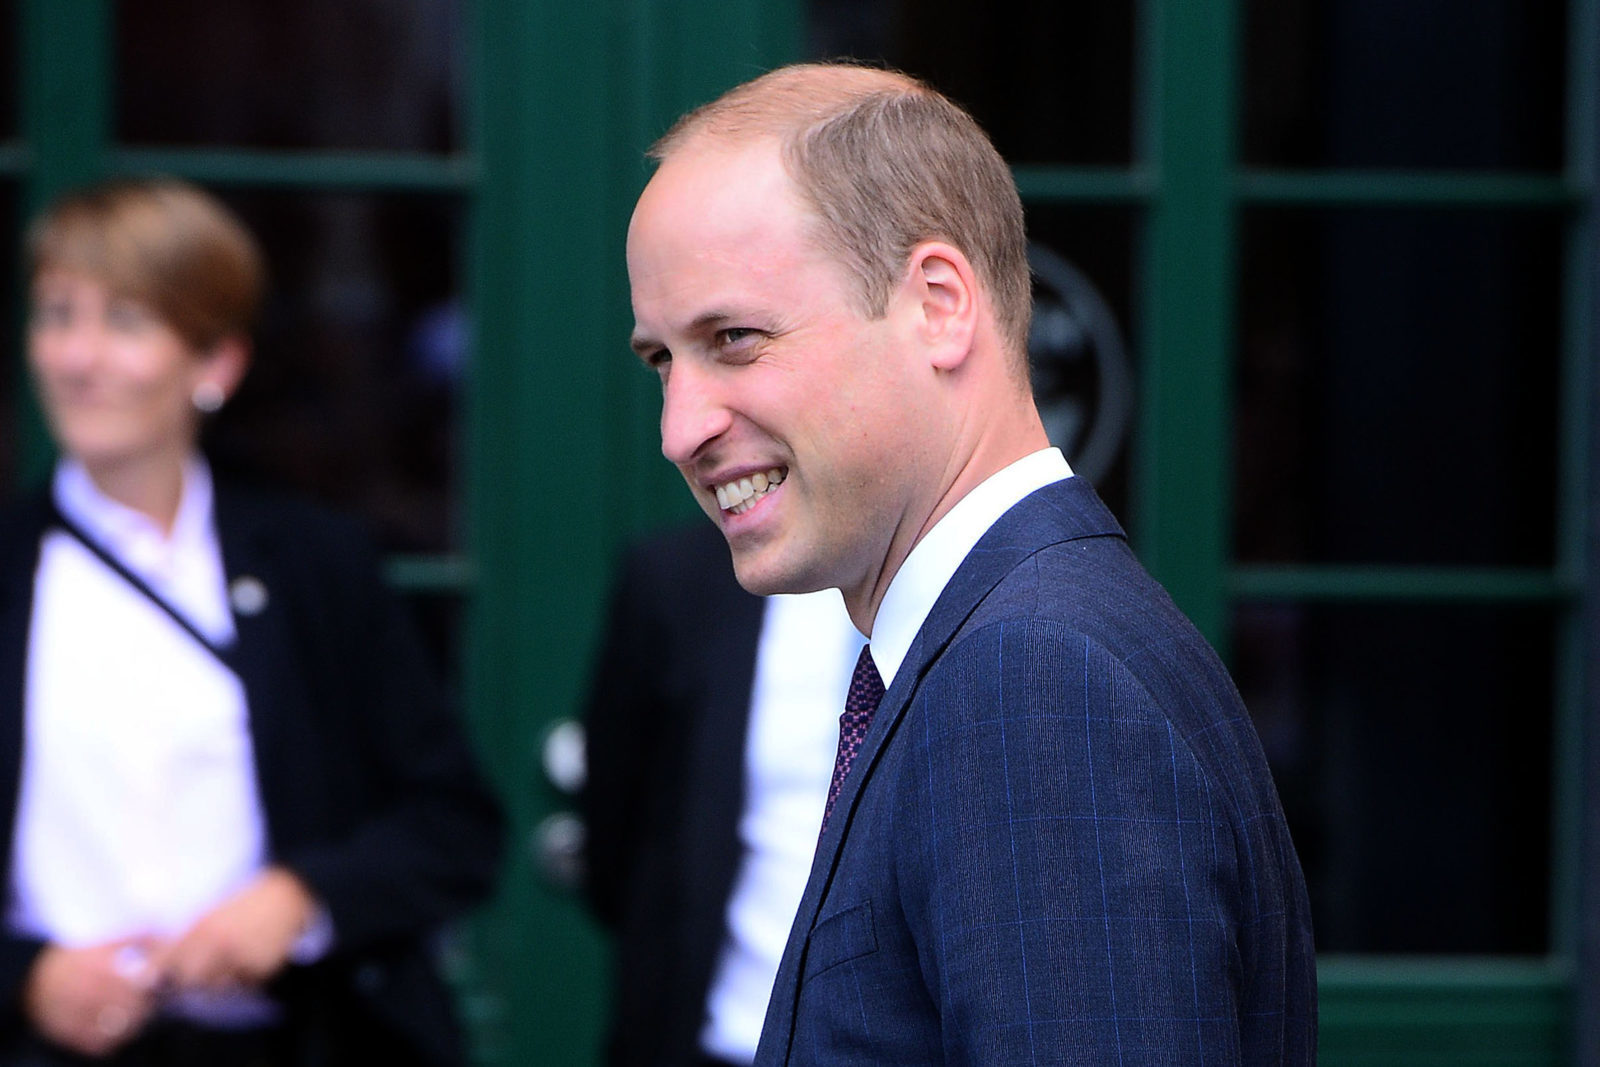 TENS of ribbons to go un-cut as William takes two weeks Paternity Leave